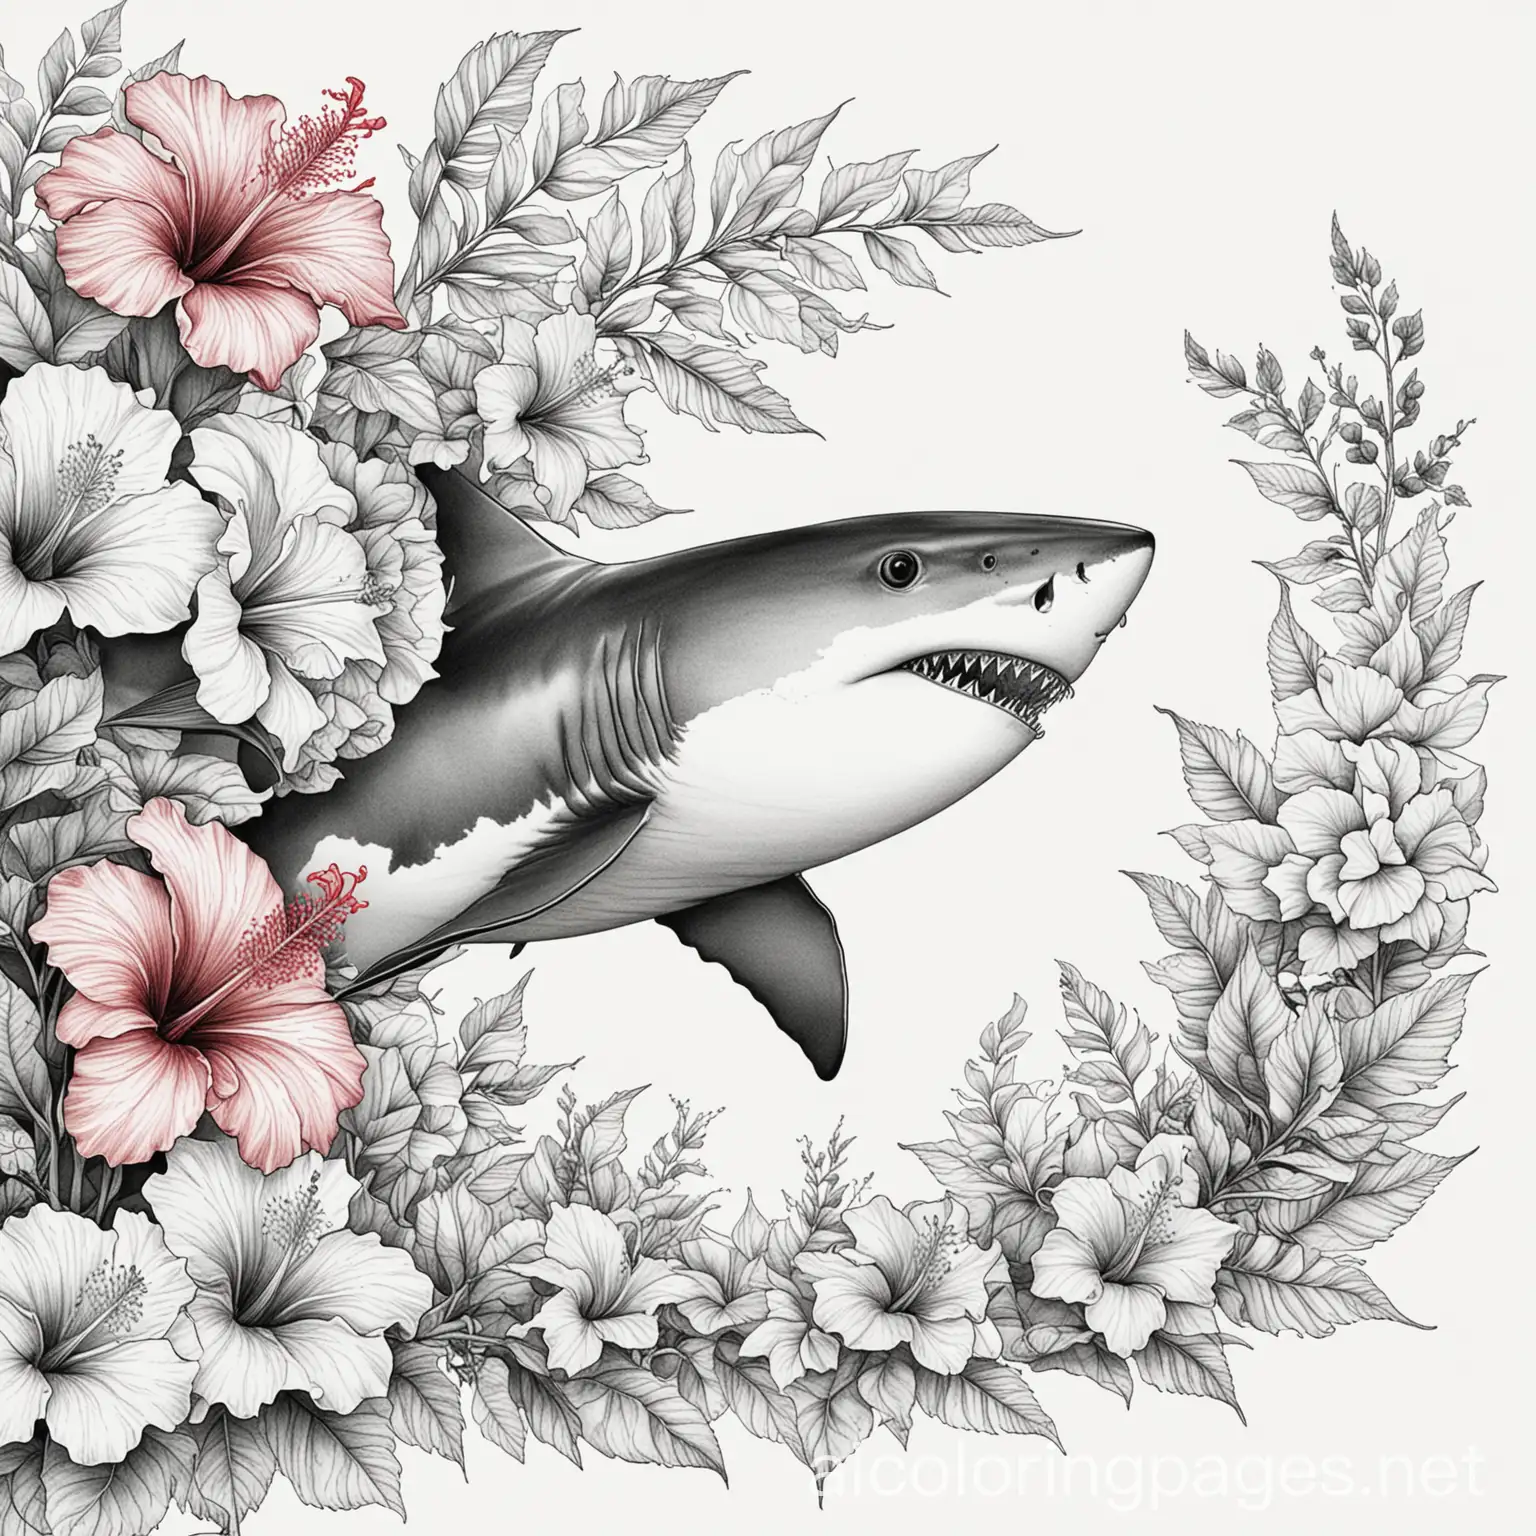 Shark-Surrounded-by-Hibiscus-Serene-Coloring-Page-for-Relaxation